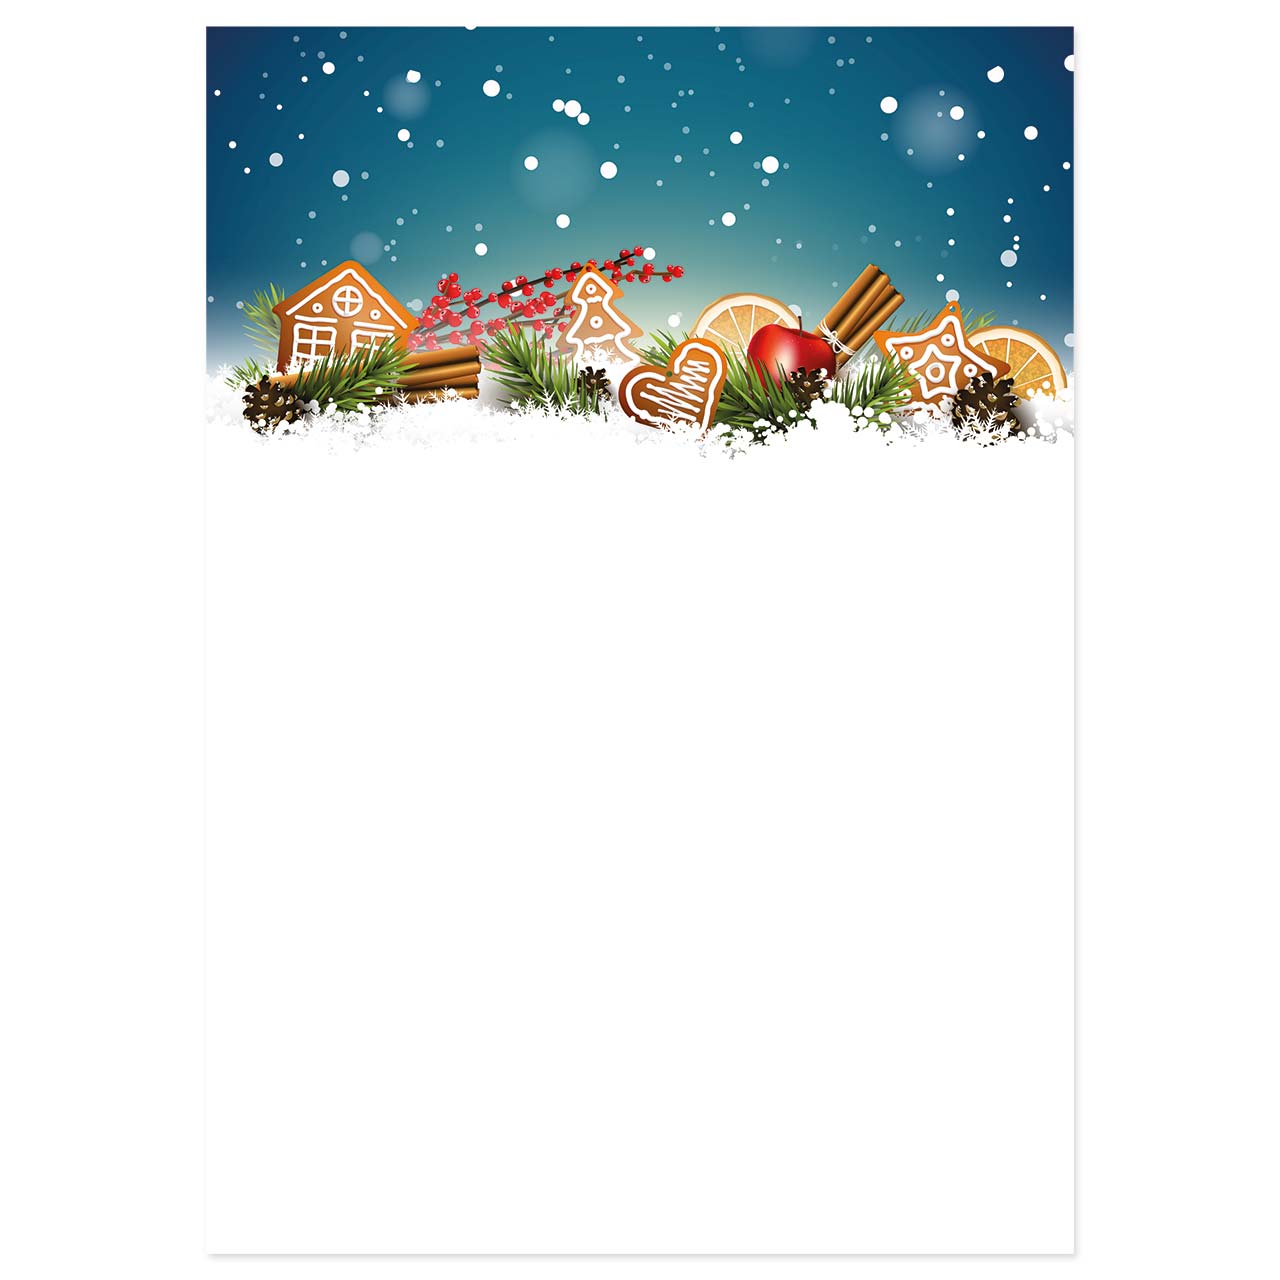 Featured image of post Weihnachtsbriefpapier Kostenlos Downloaden Weihnachtsbriefpapier set briefpapier mit weihnachtsmann motiv a4 briefpapier